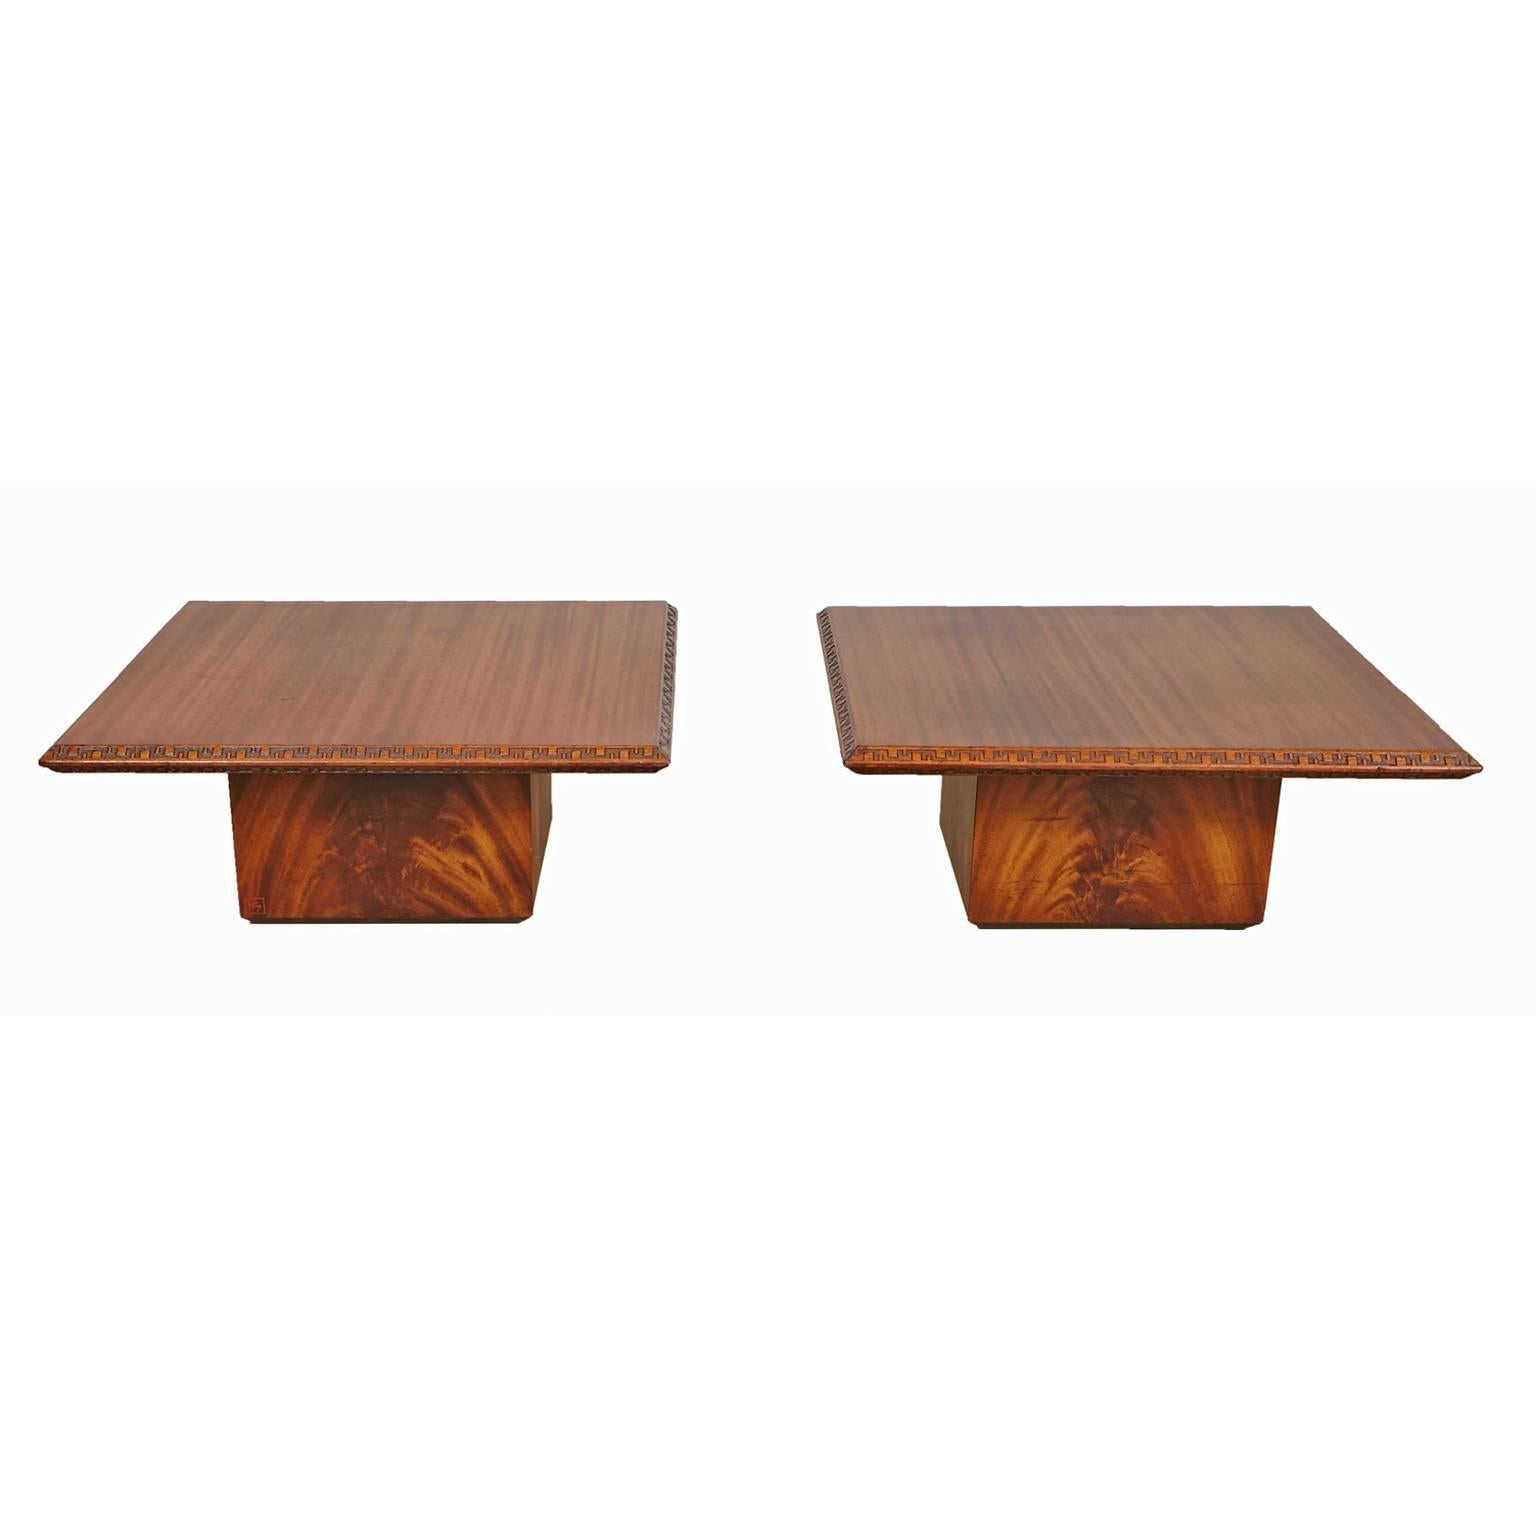 Classic pair of mahogany end/side tables by Frank Lloyd Wright for Heritage Henredon. Manufactured in 1955, from the Taliesin collection.